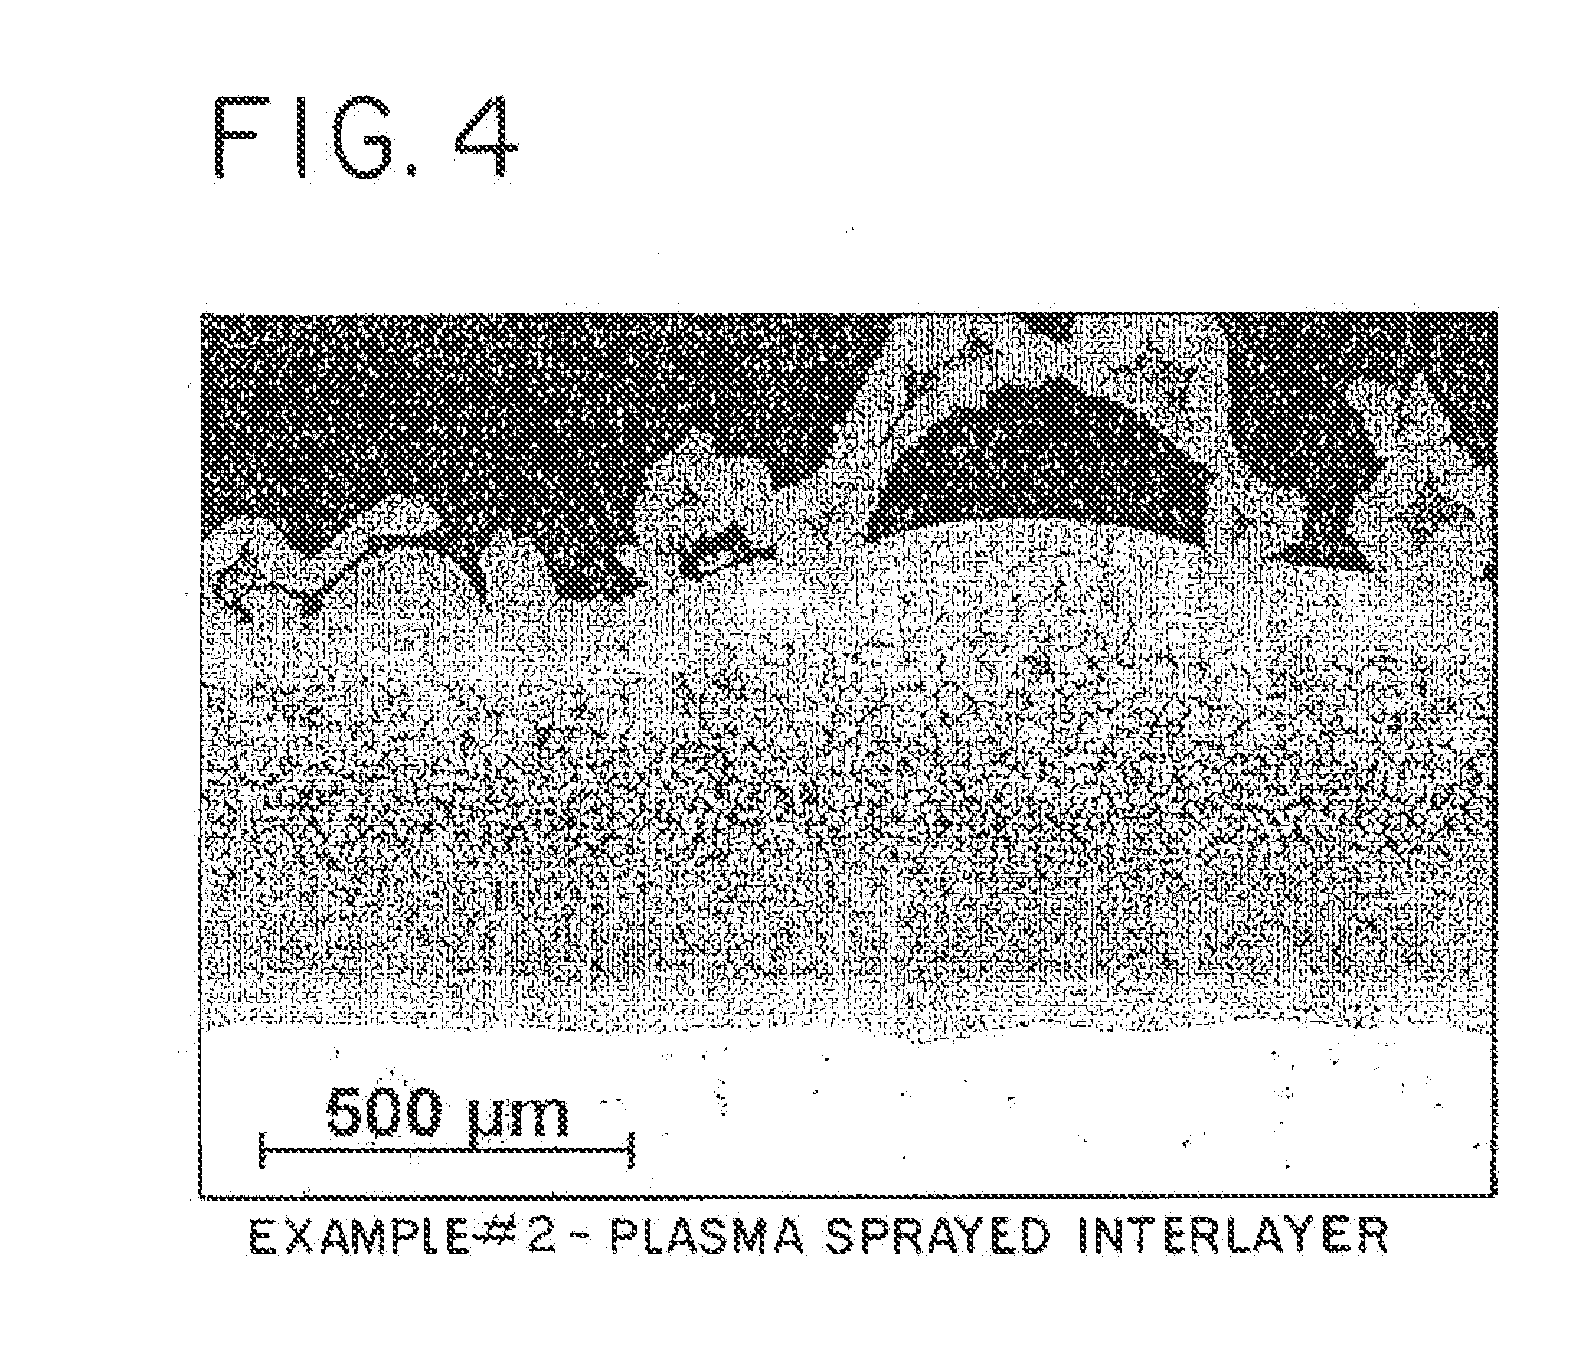 Method for bonding a tantalum structure to a cobalt-alloy substrate